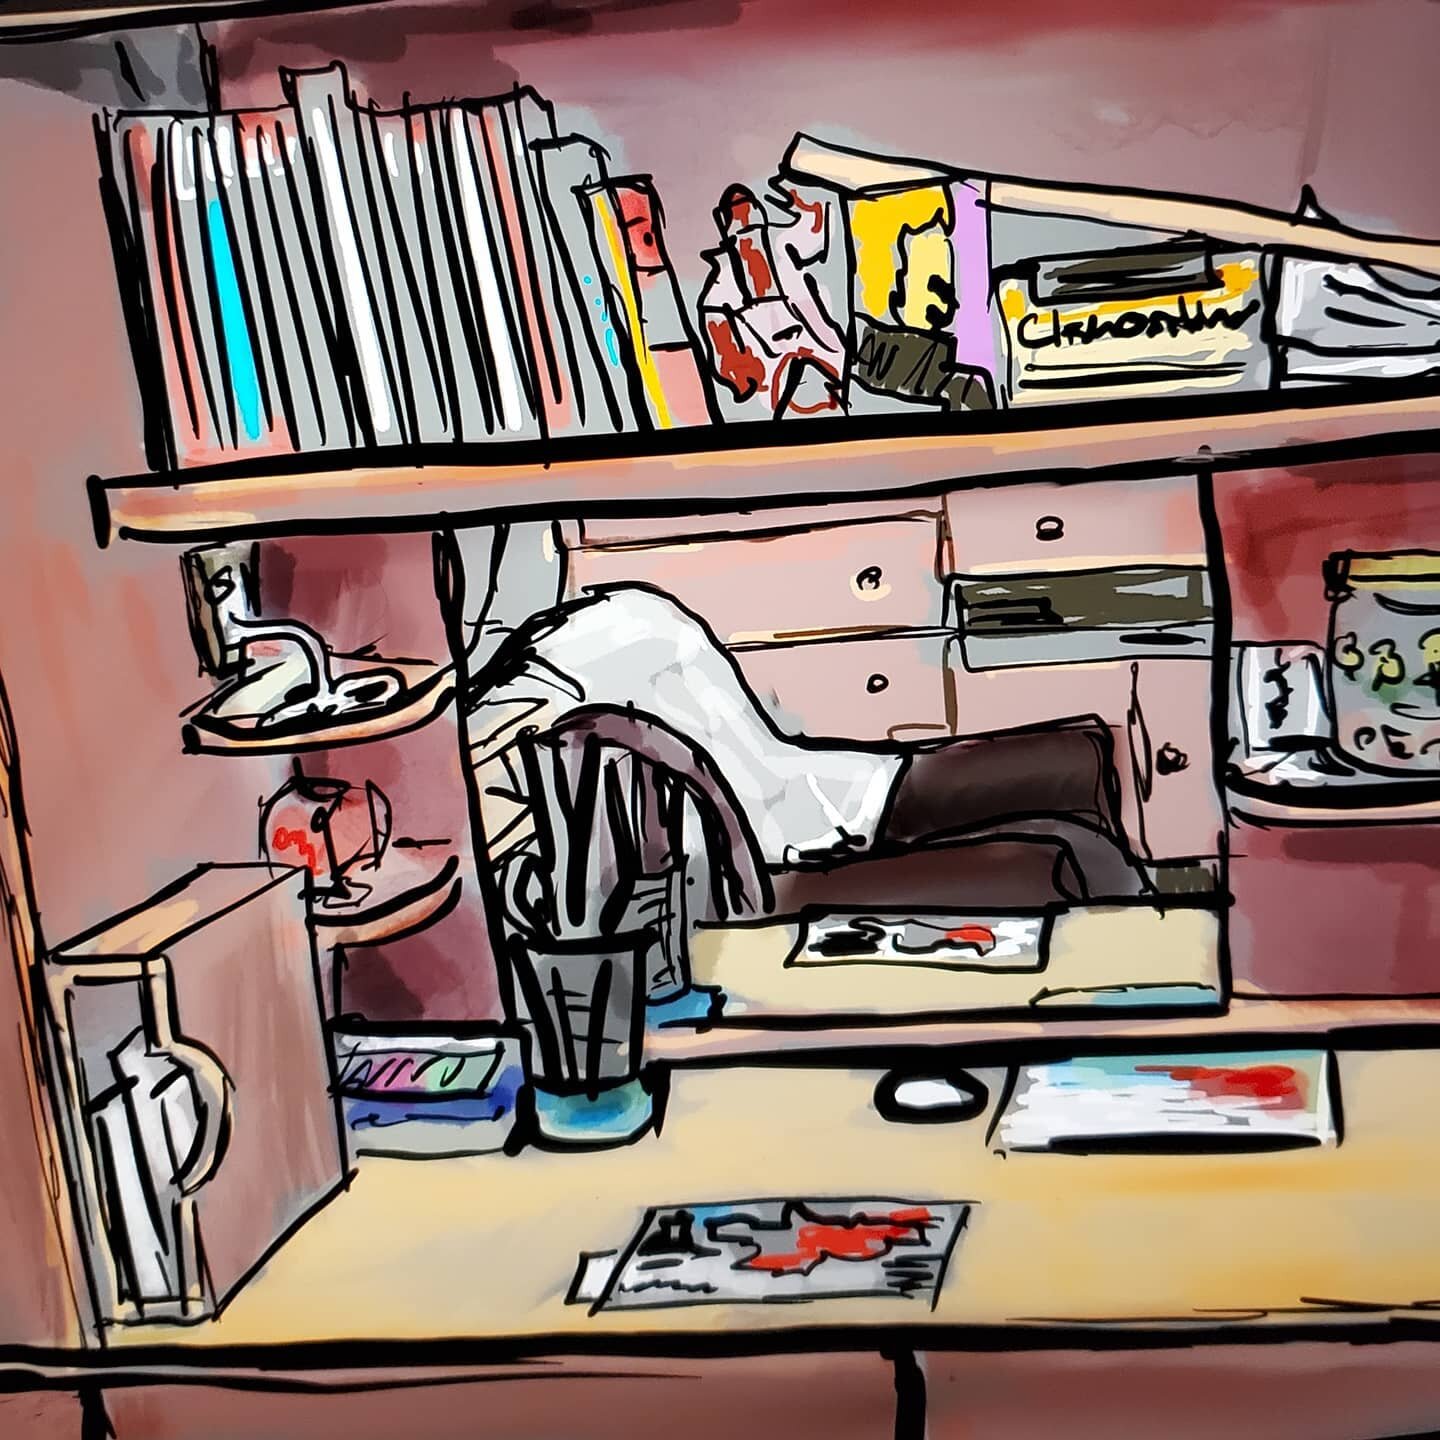 Practicing drawing spaces In a digital format as well as planning out new painting ideas. 

Going to be trying some more &quot;illustrative&quot; approaches in my upcoming paintings. 

Here's my fianc&eacute;'s desk space drawn out. 

#only1joey #onl